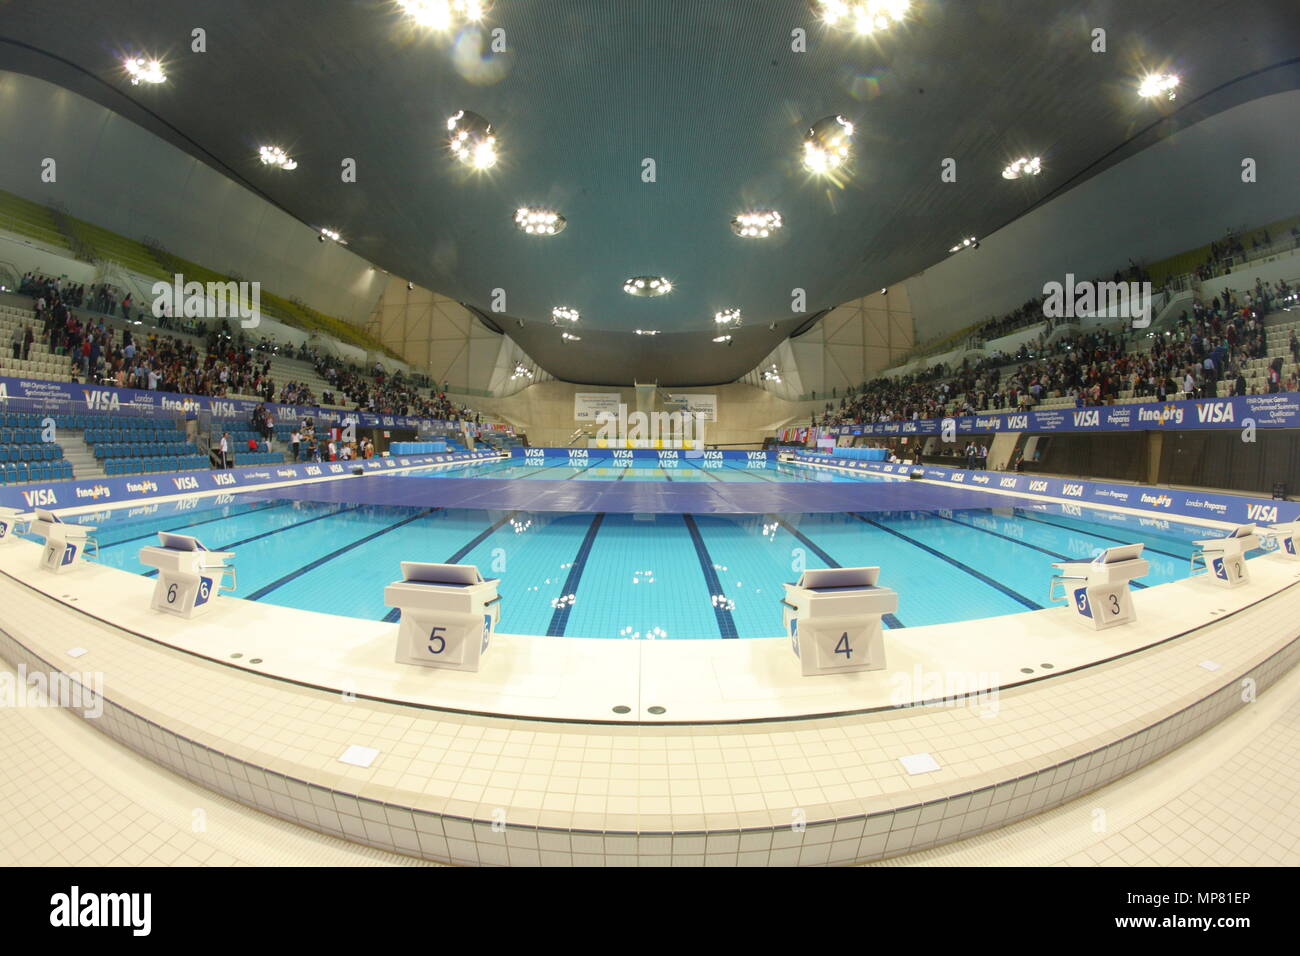 The Aquatic Centre during the Fina Synchronised Swimming events at the London Olympic Park 22 April 2012 --- Image by © Paul Cunningham Stock Photo